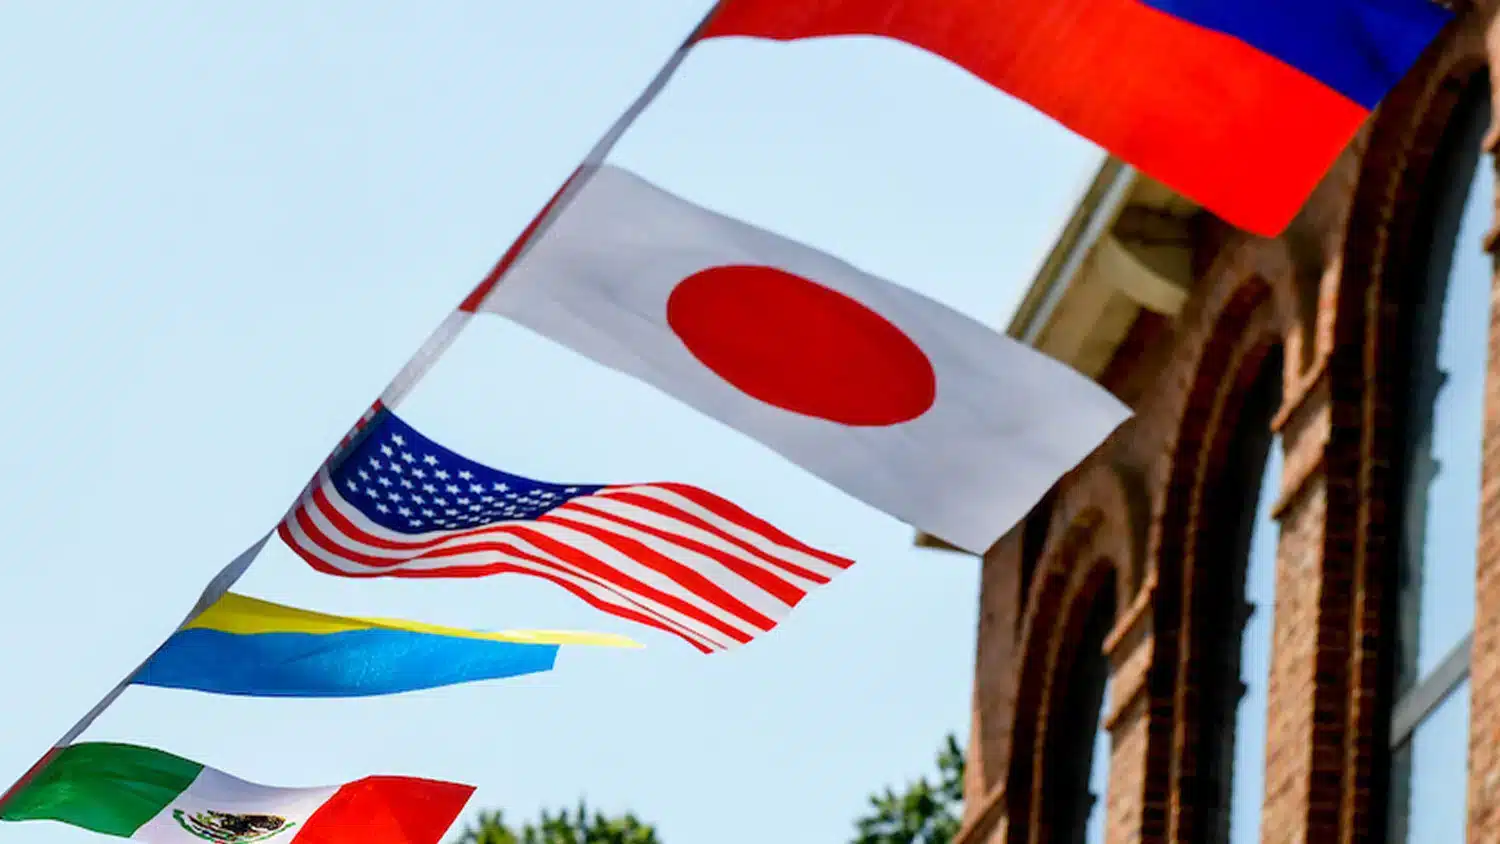 A string of national flags at NC State, including the flags of Japan and the United States.